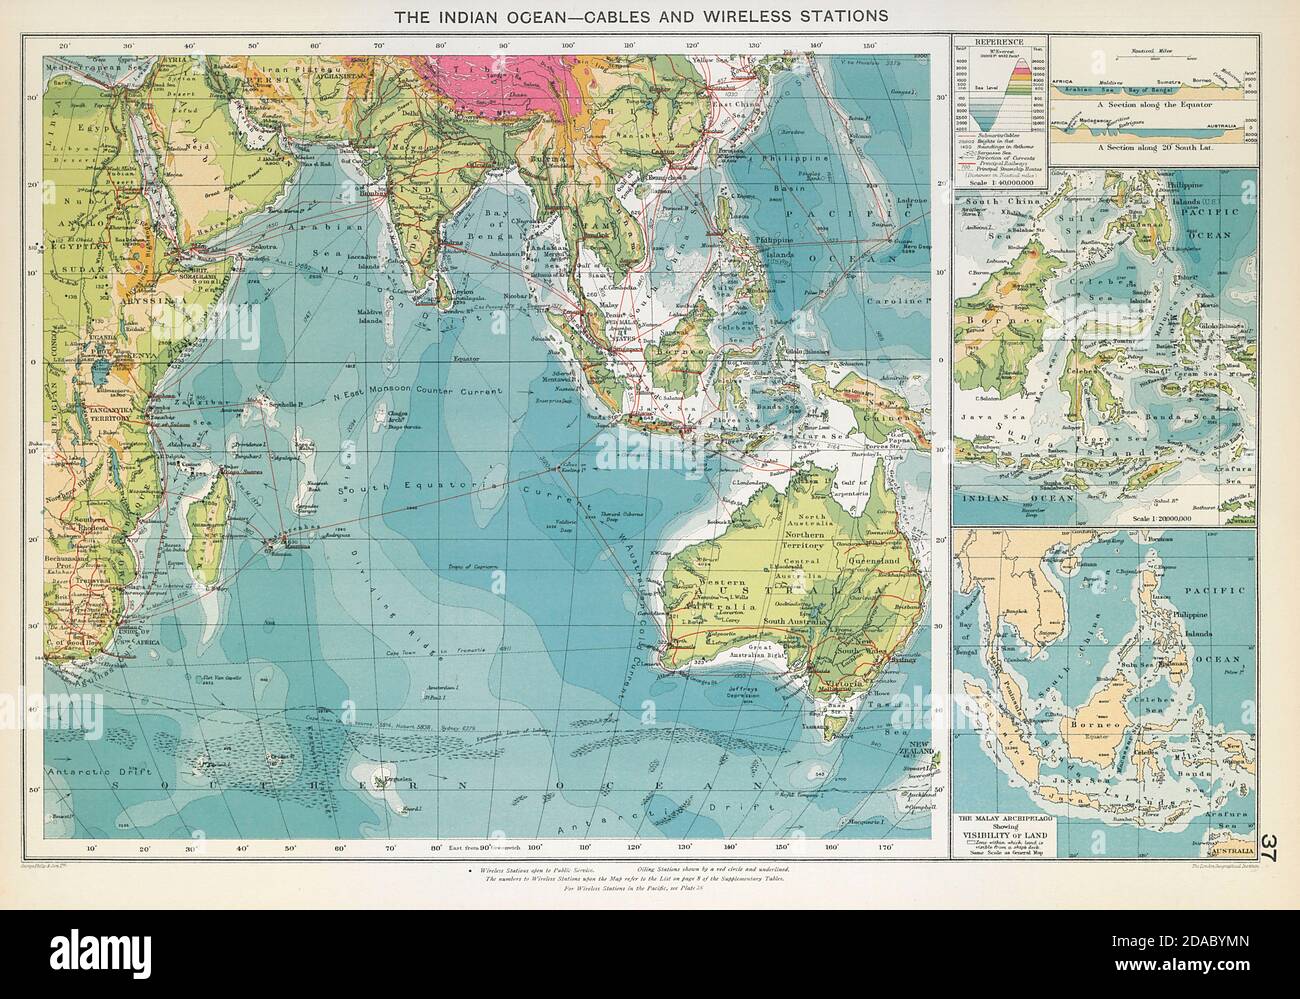 Indian Ocean. Cables Wireless Stations. Land visibility. Shipping lines 1927 map Stock Photo